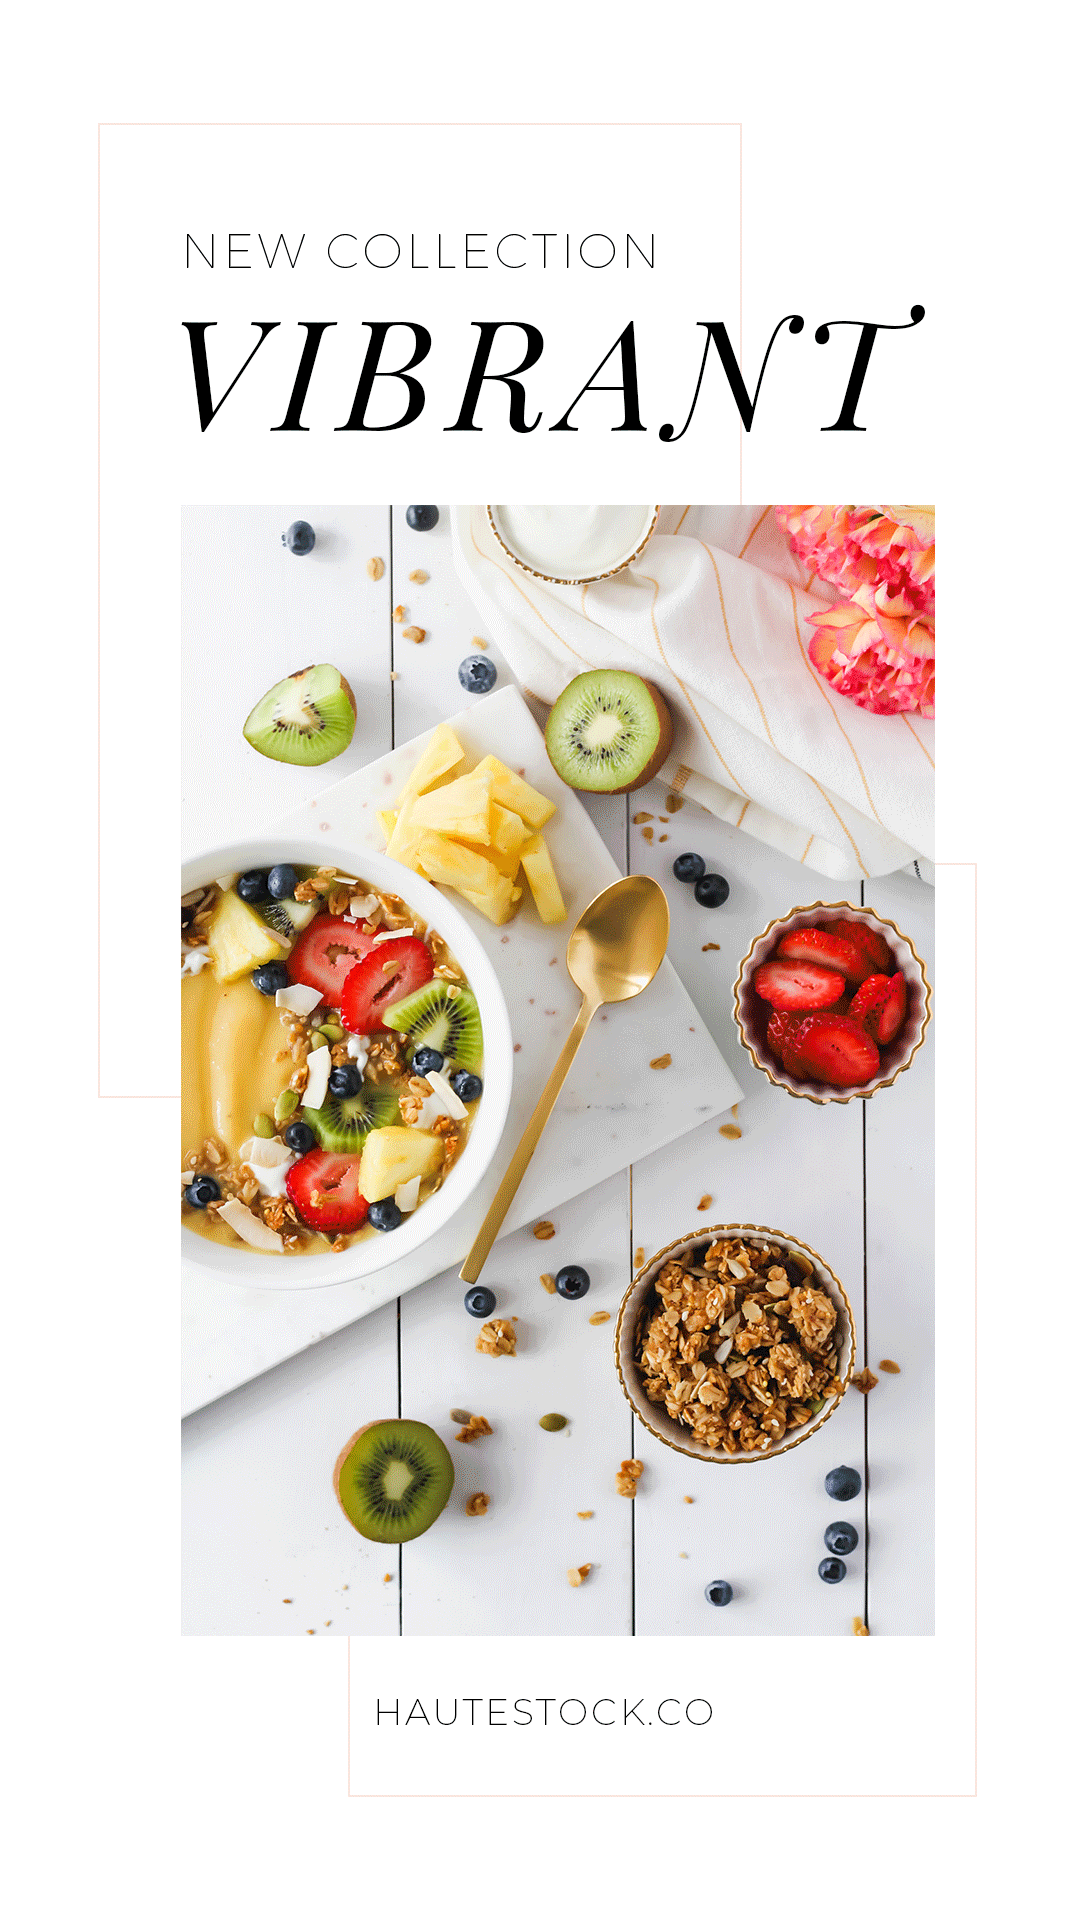 Vibrant, colorful, healthy food stock photos for health coaches, nutritionists, food bloggers and more! Available exclusively for Haute Stock members.